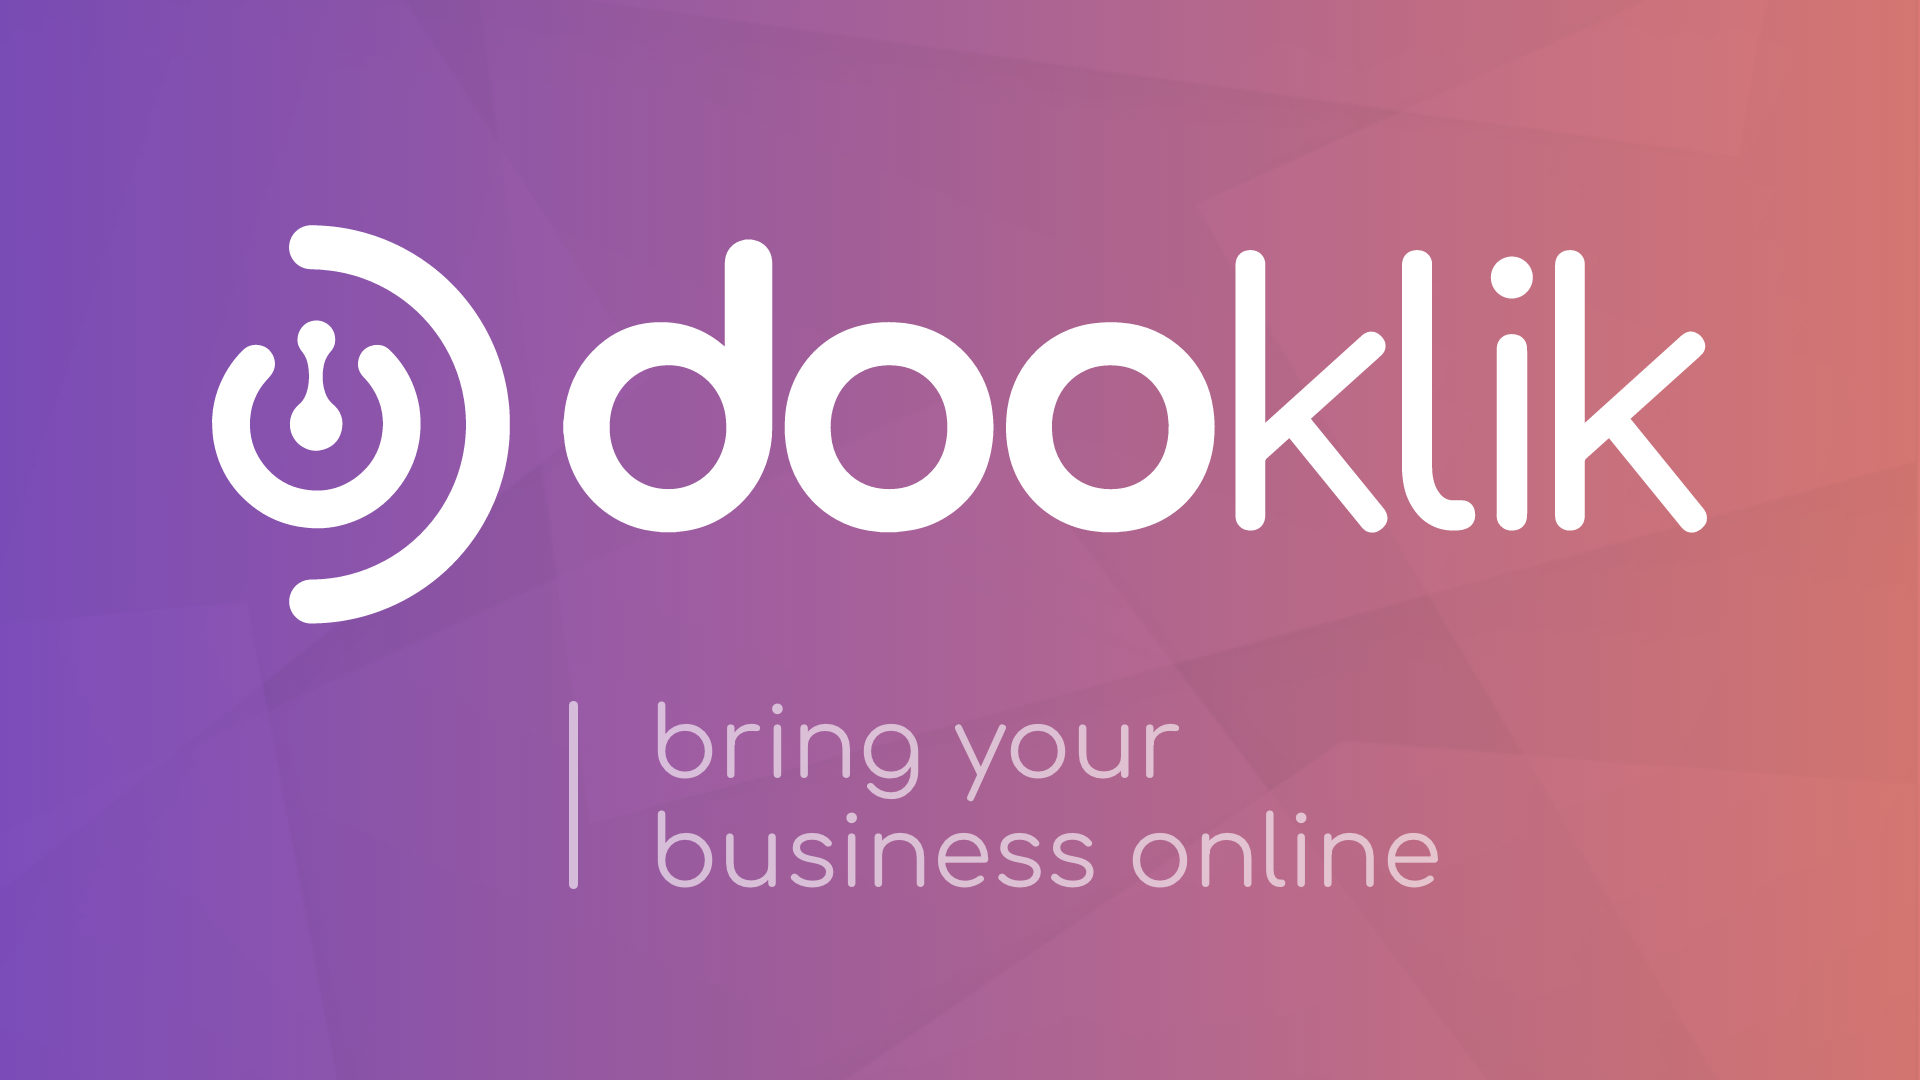 Do I need to be a designer or developer to use dooklik?